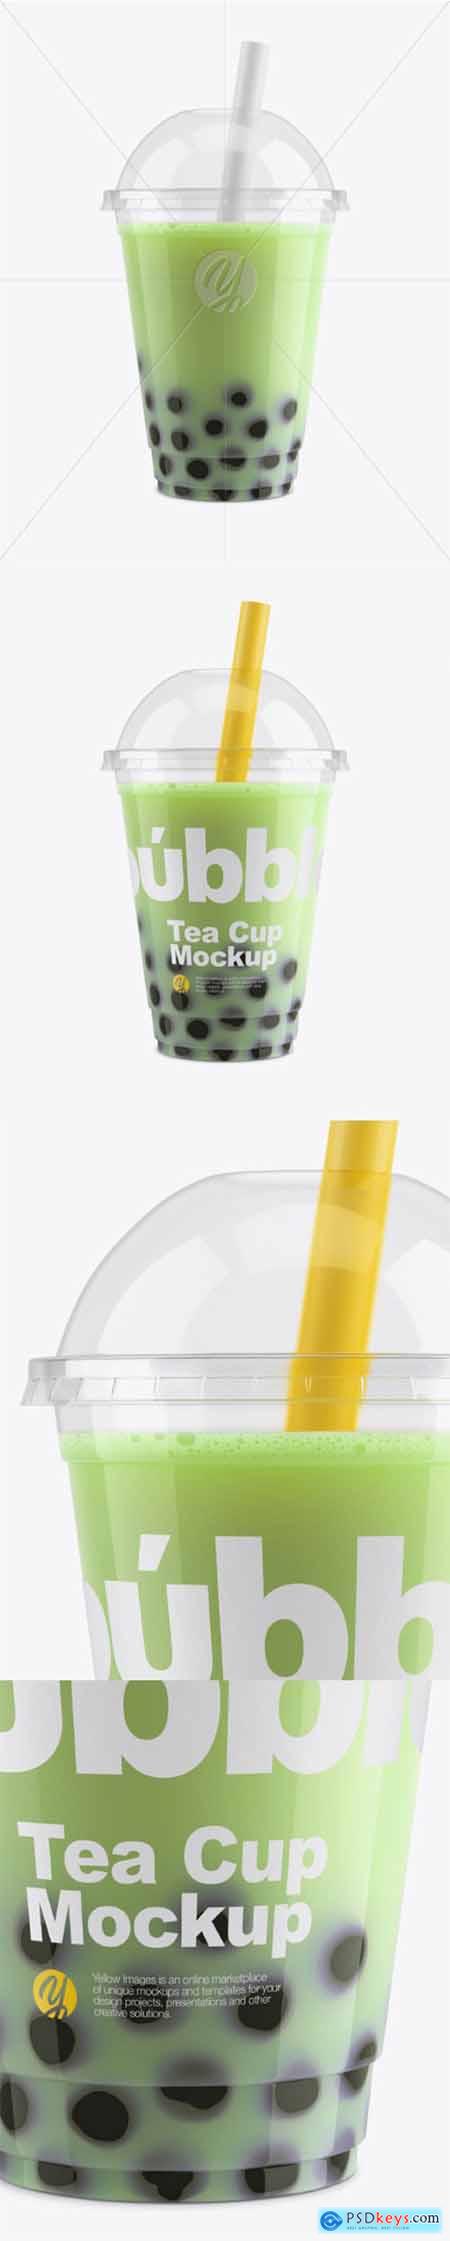 Download Bubble Tea Cup Mockup Front View Free Download Photoshop Vector Stock Image Via Torrent Zippyshare From Psdkeys Com